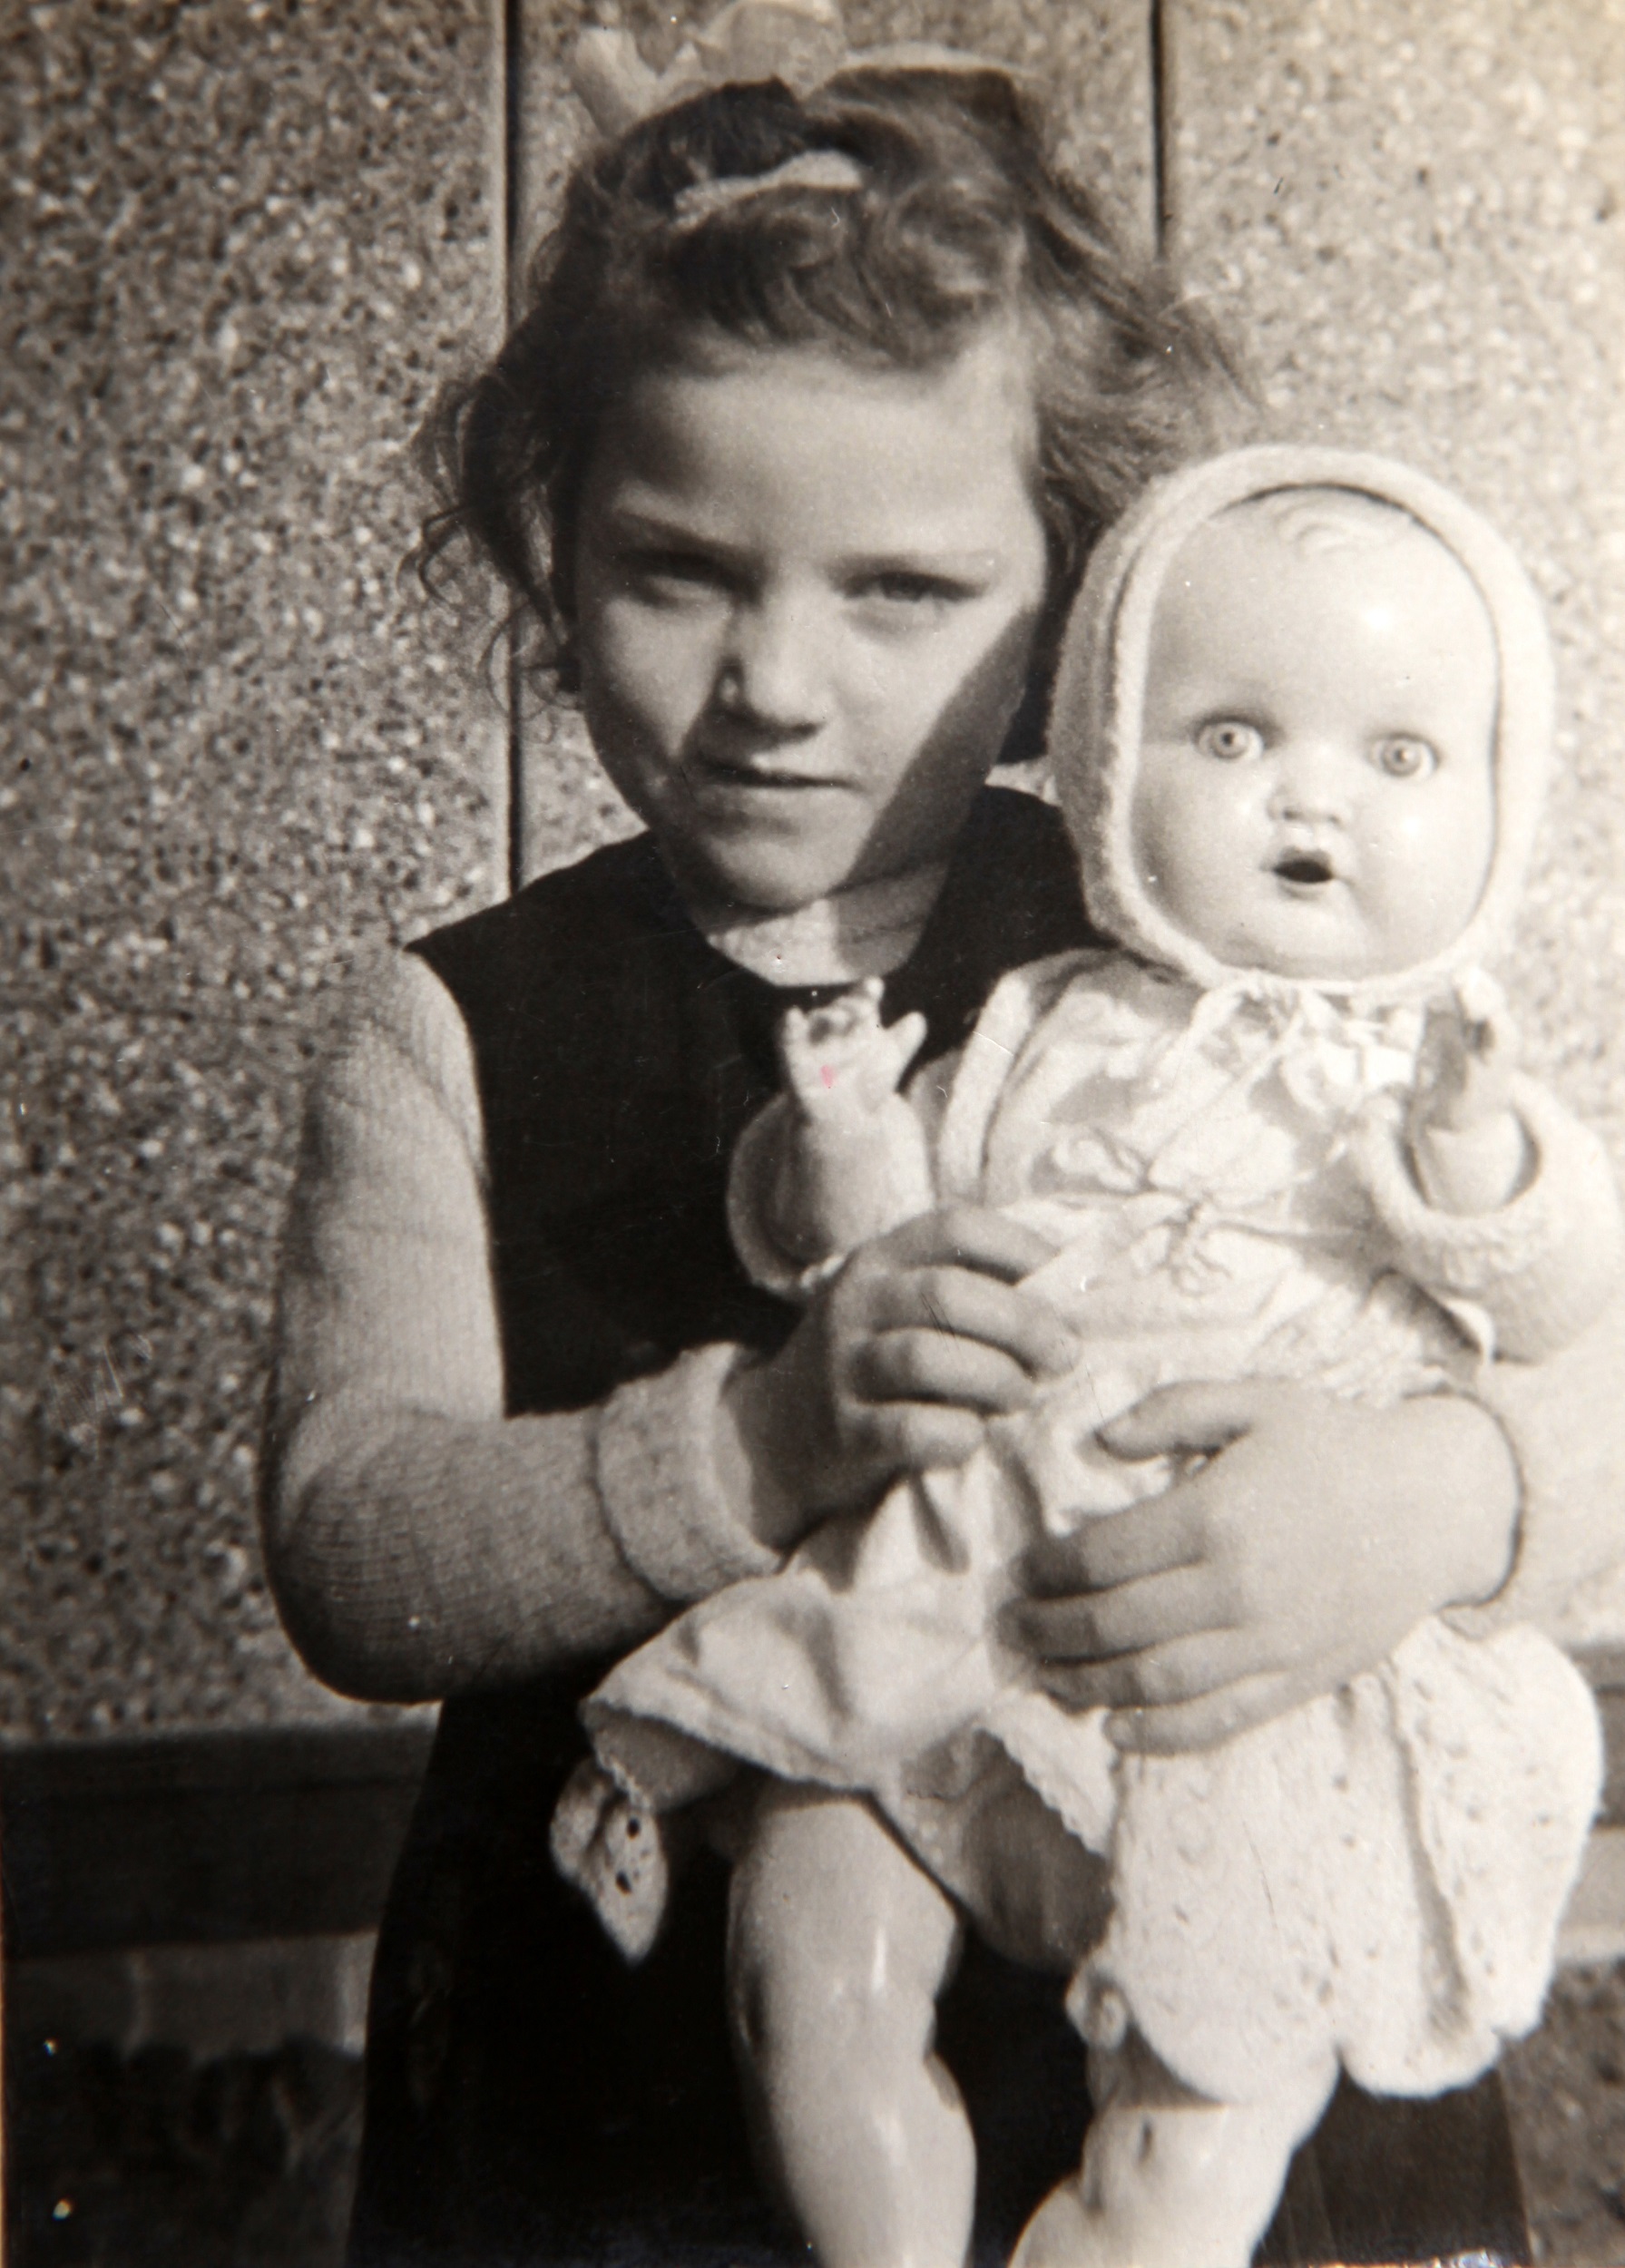 Pat holding her doll in the prefab kitchen. Bolsover, Derbyshire